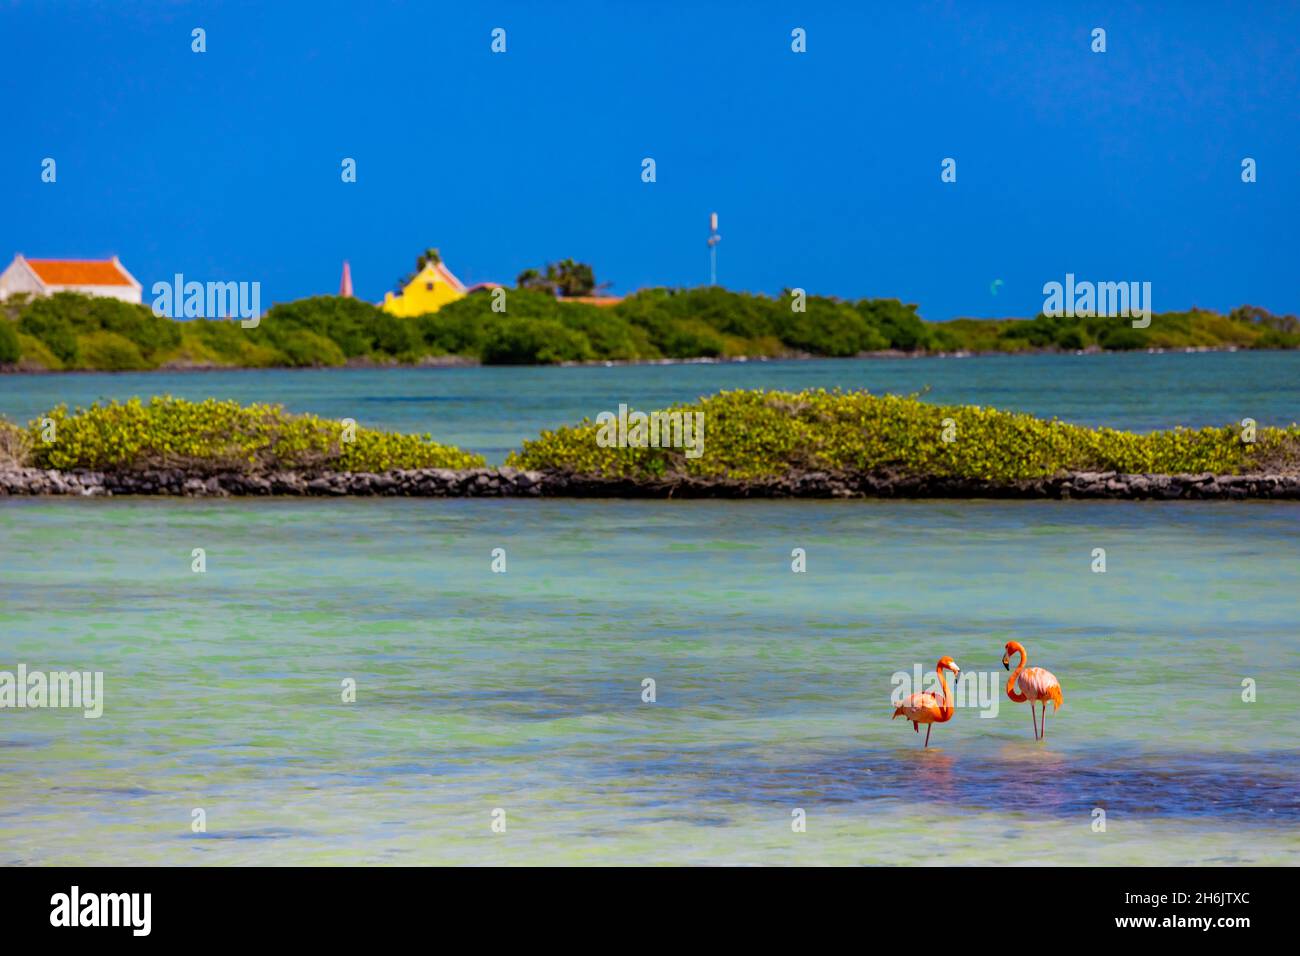 Flamingos lounging around in their natural habitat, Bonaire, Netherlands Antilles, Caribbean, Central America Stock Photo